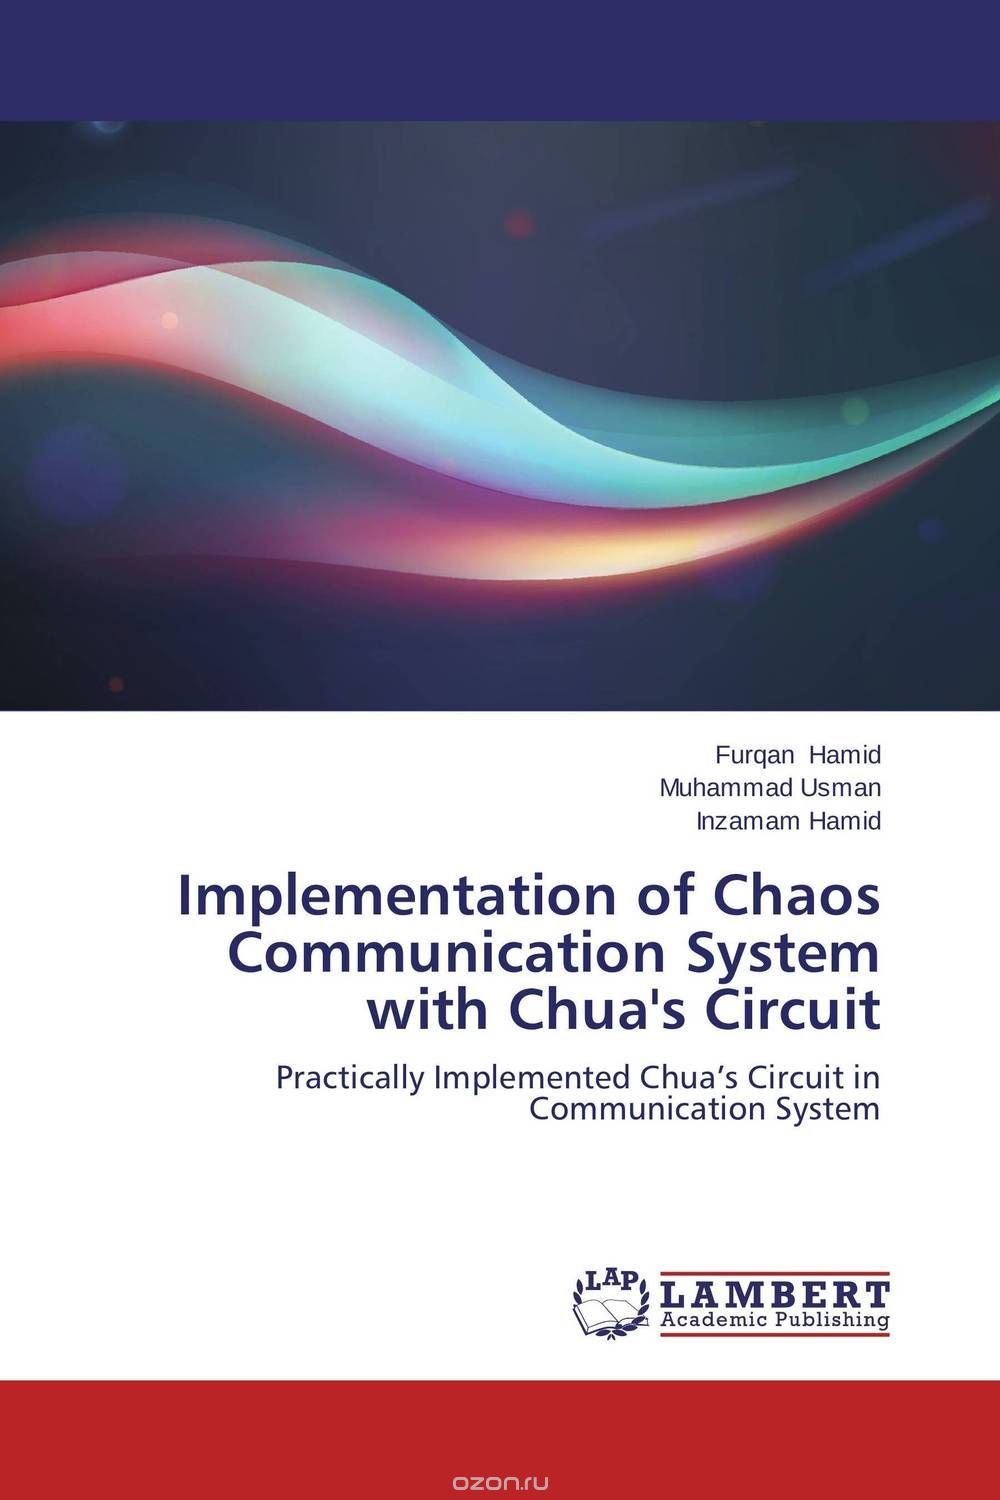 Implementation of Chaos Communication System with Chua's Circuit